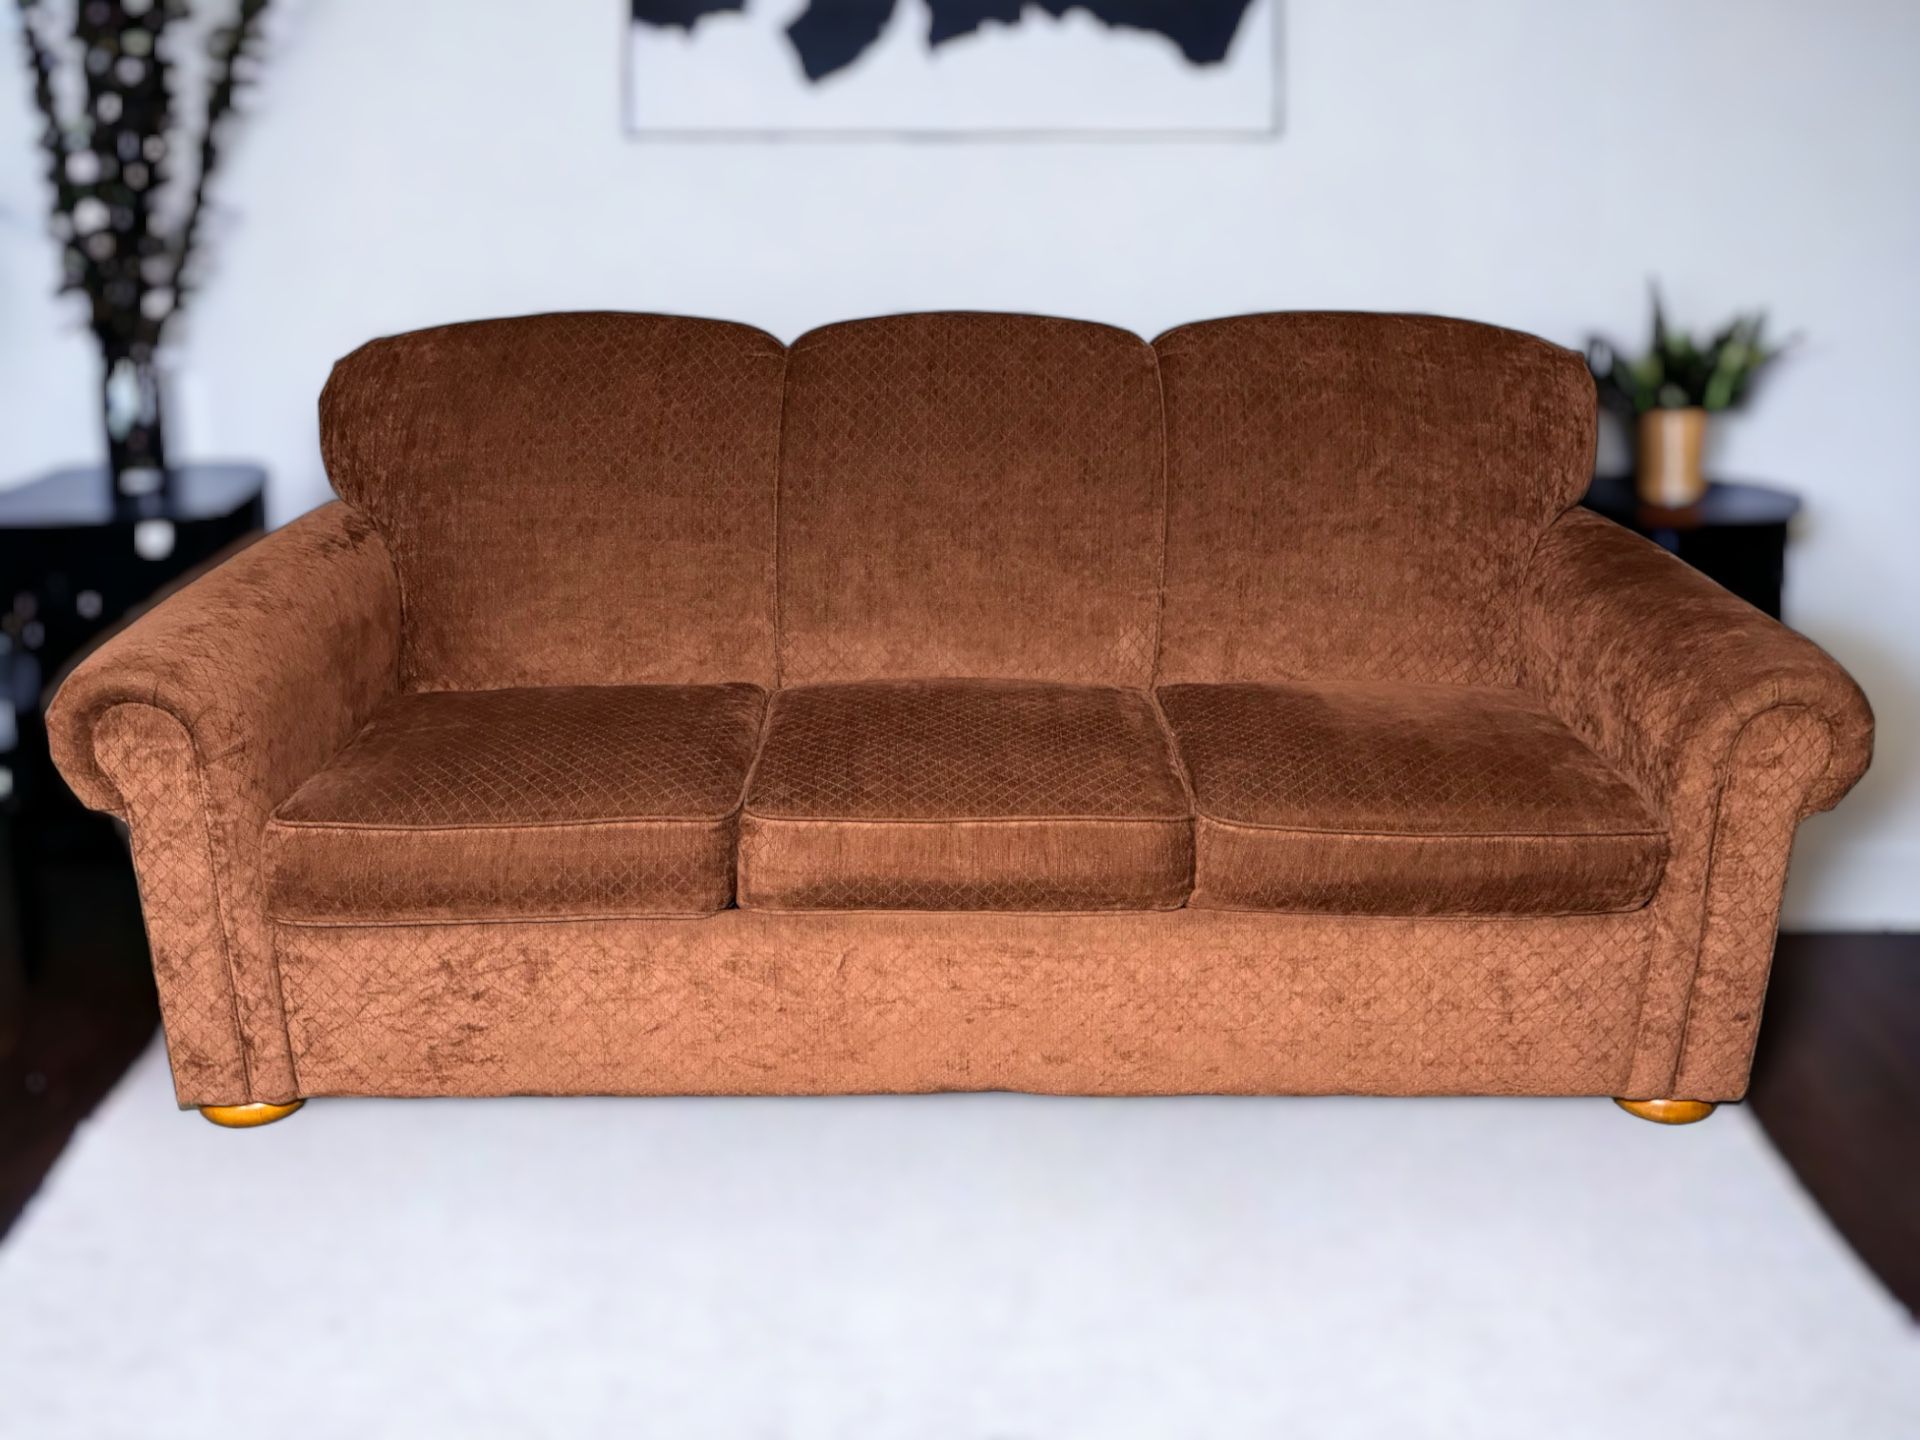 Flexsteel Brown/Copper Fabric 3-Seat Hide-a-Bed Sleeper Couch